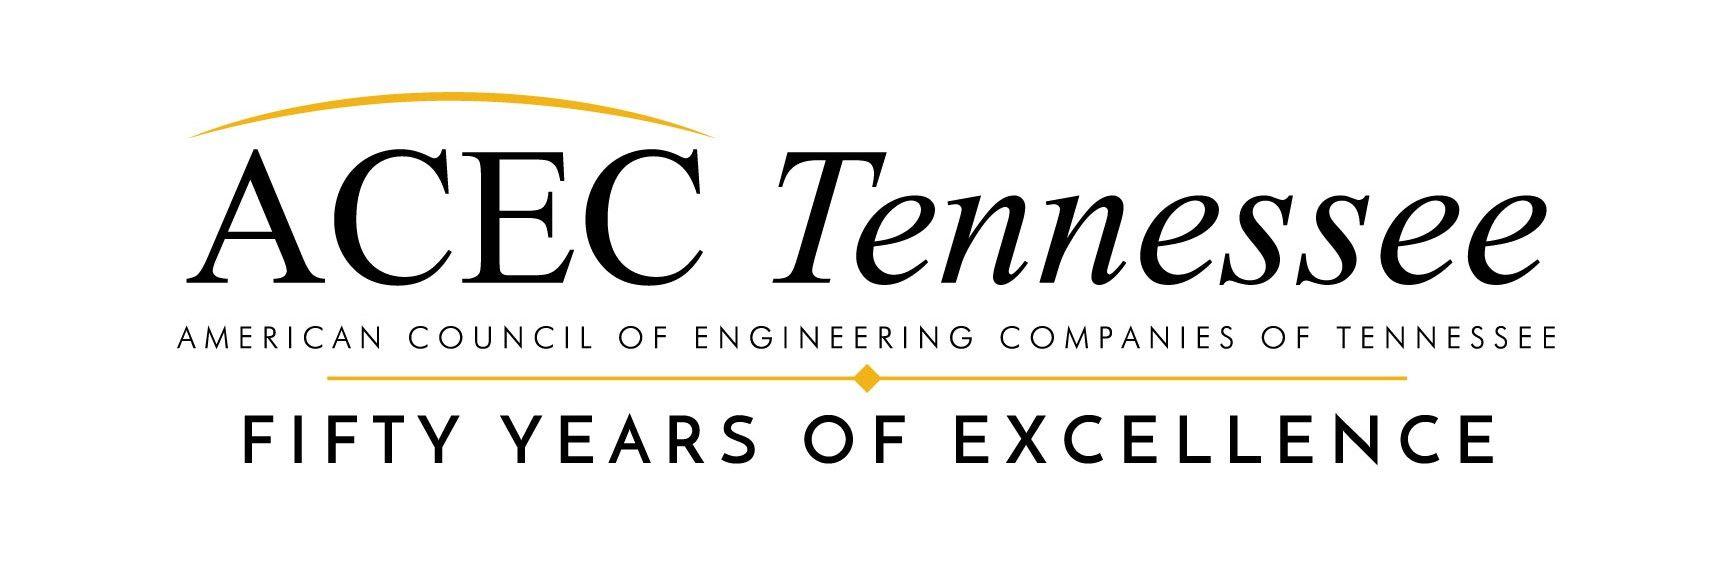 ACEC Logo - acec-tennessee-50th-Business-Logo-2018- ActionsProve, LLC